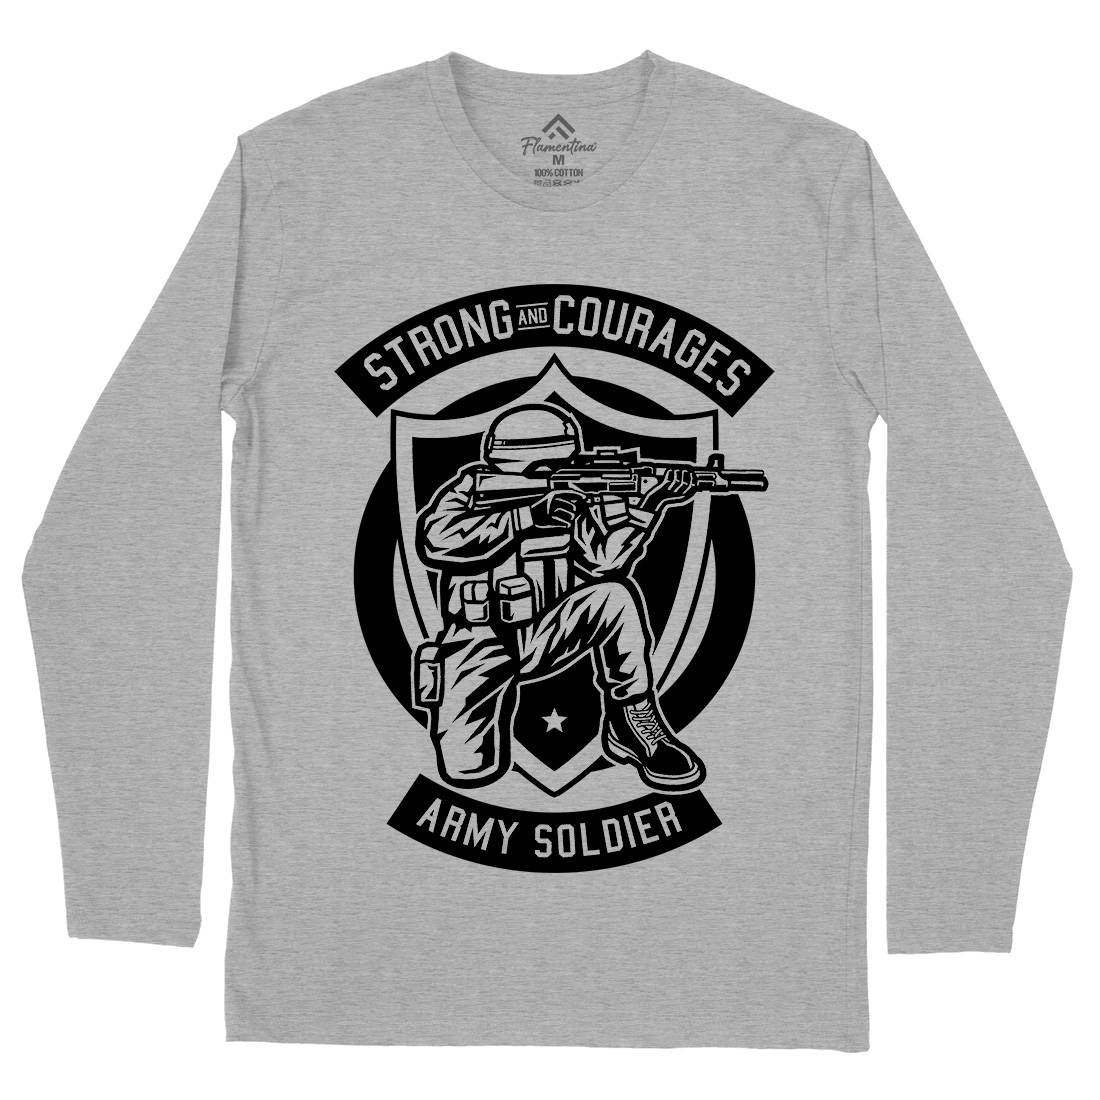 Army Soldier Mens Long Sleeve T-Shirt Army B483